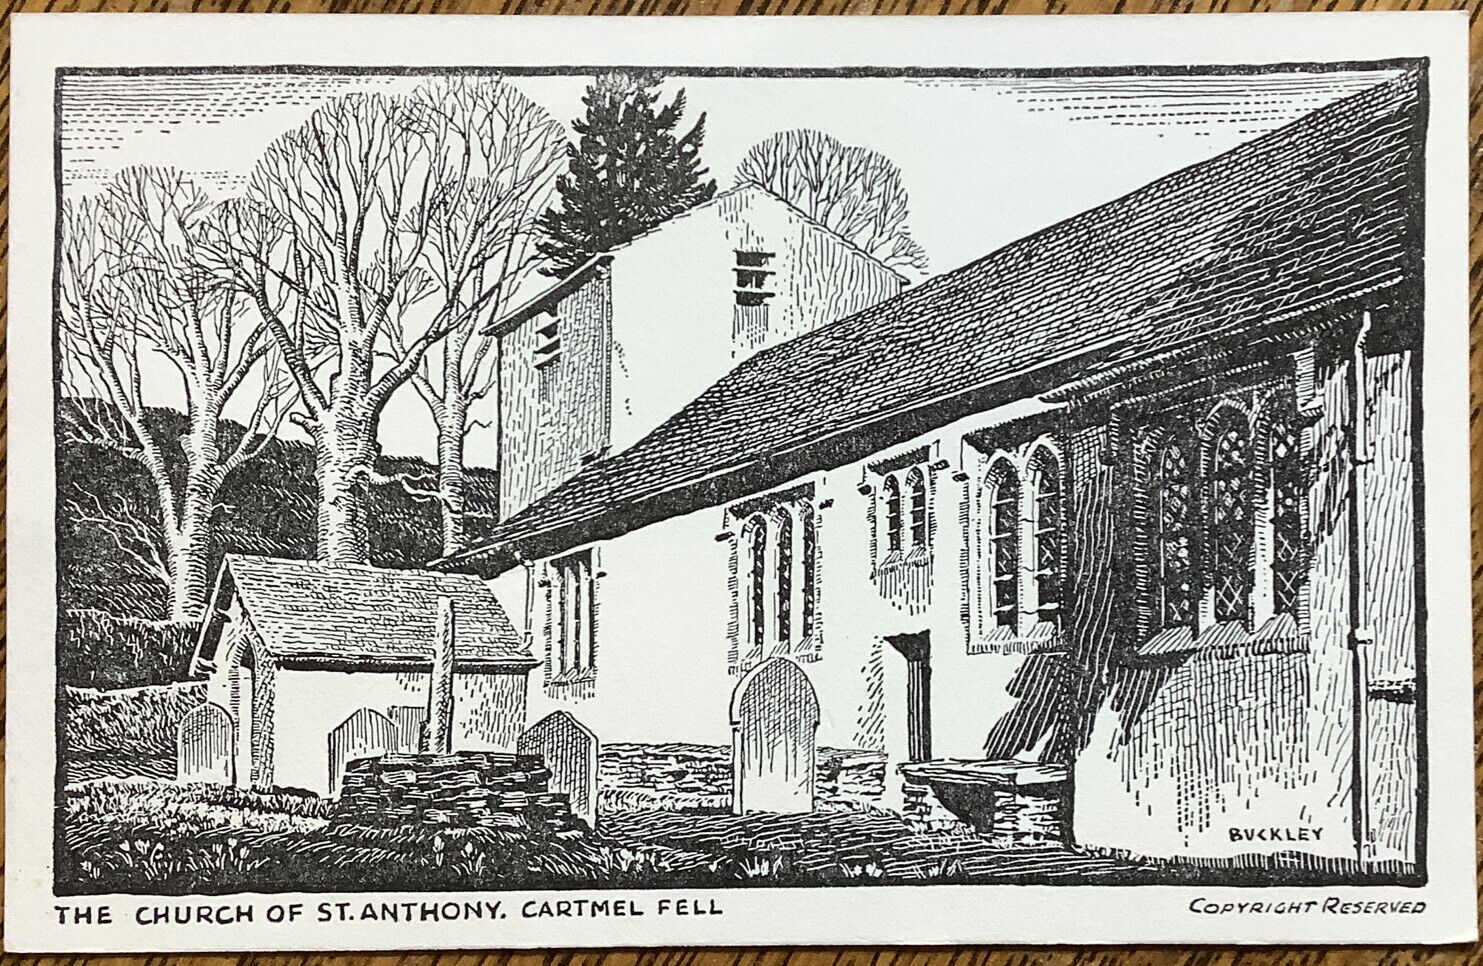 House Clearance - Cartmel Fell Church of St. Anthony Buckley Wadsworth Grange Over Sands Service